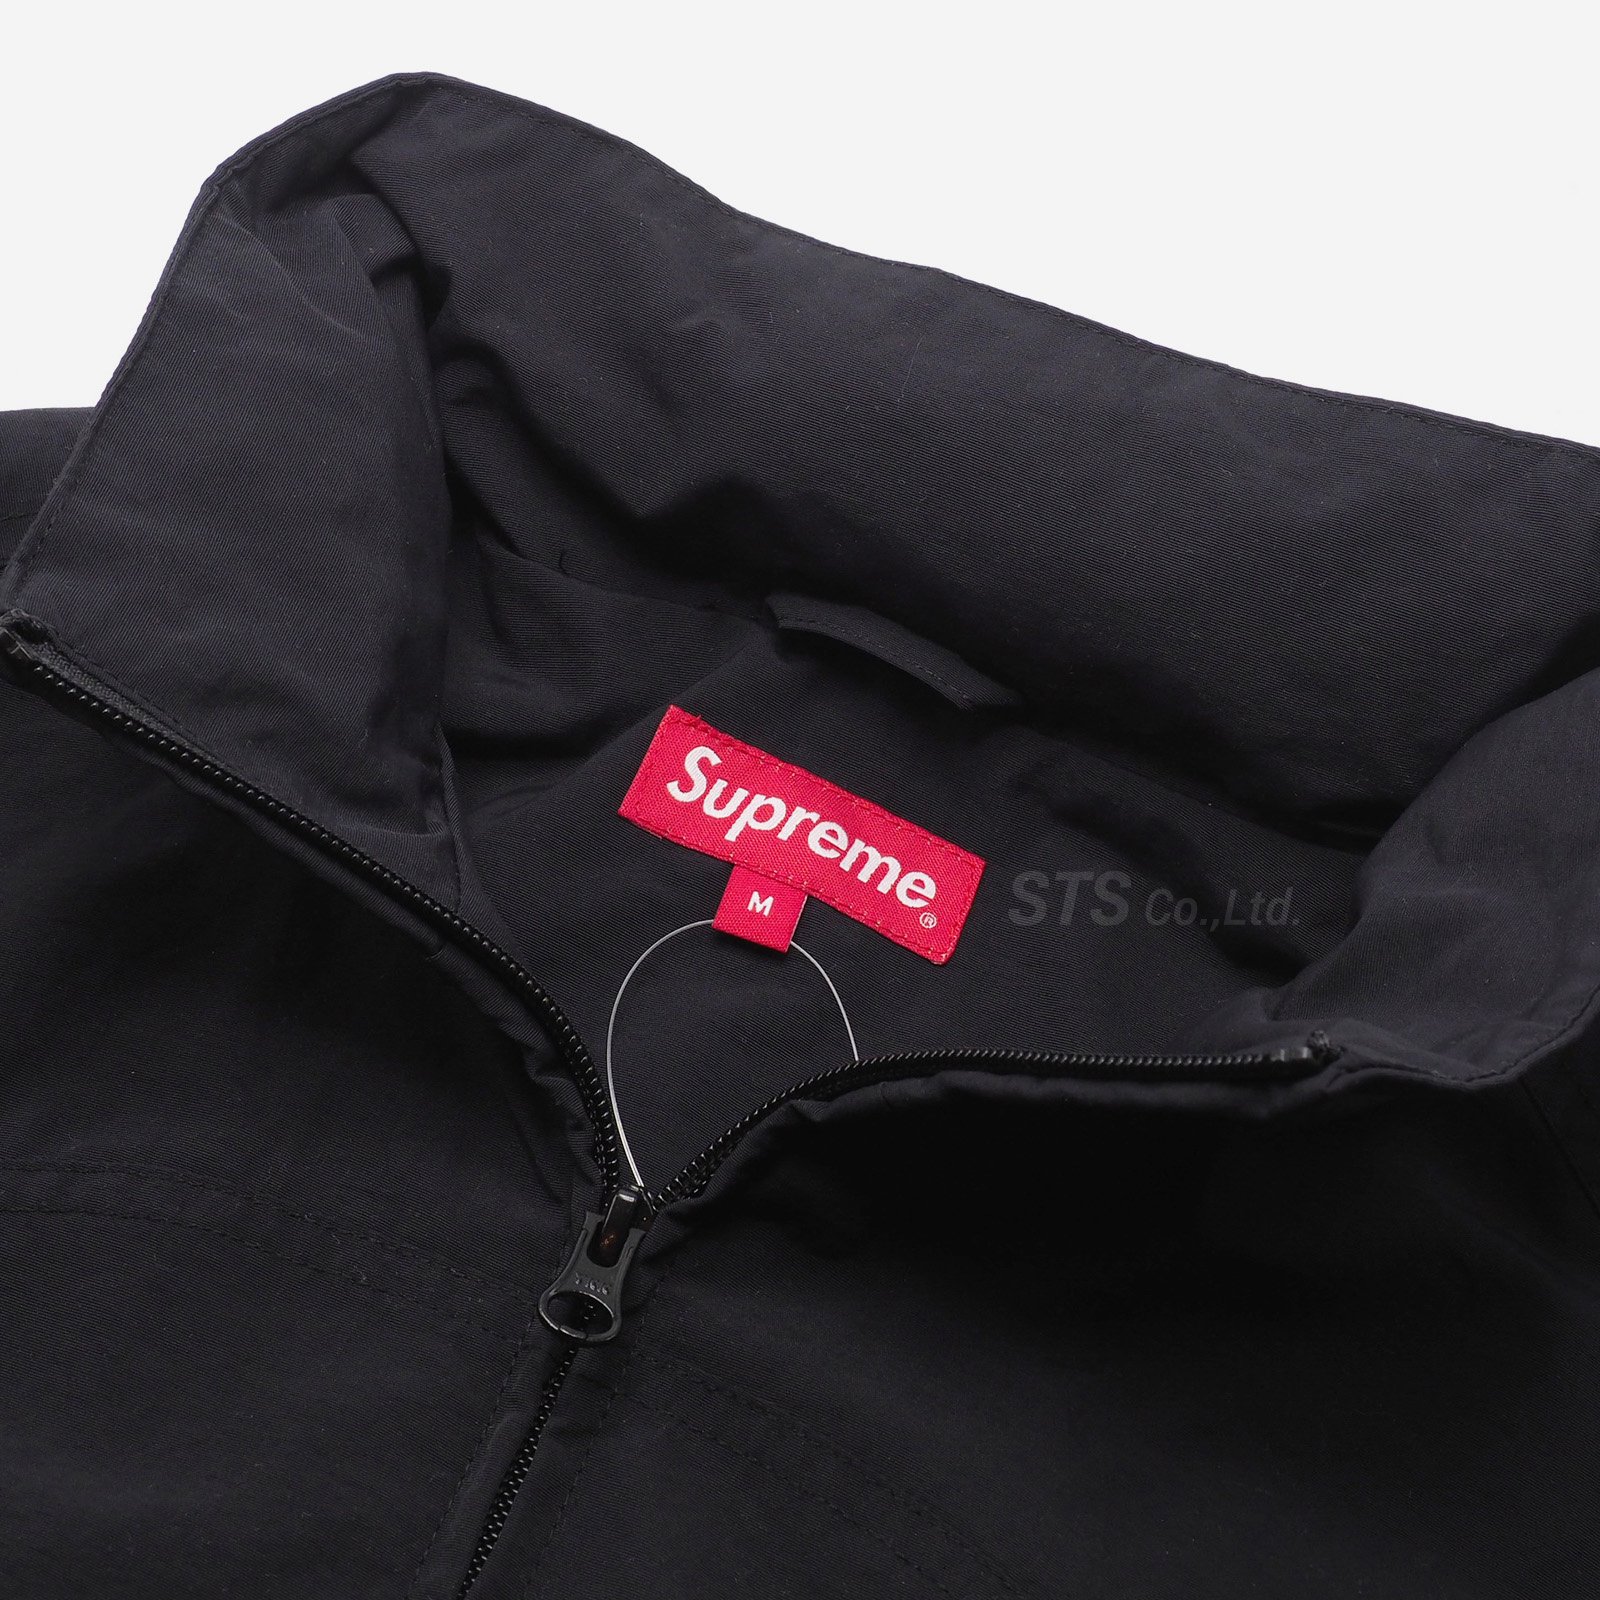 supreme Spellout Track Jacket &Pant セット